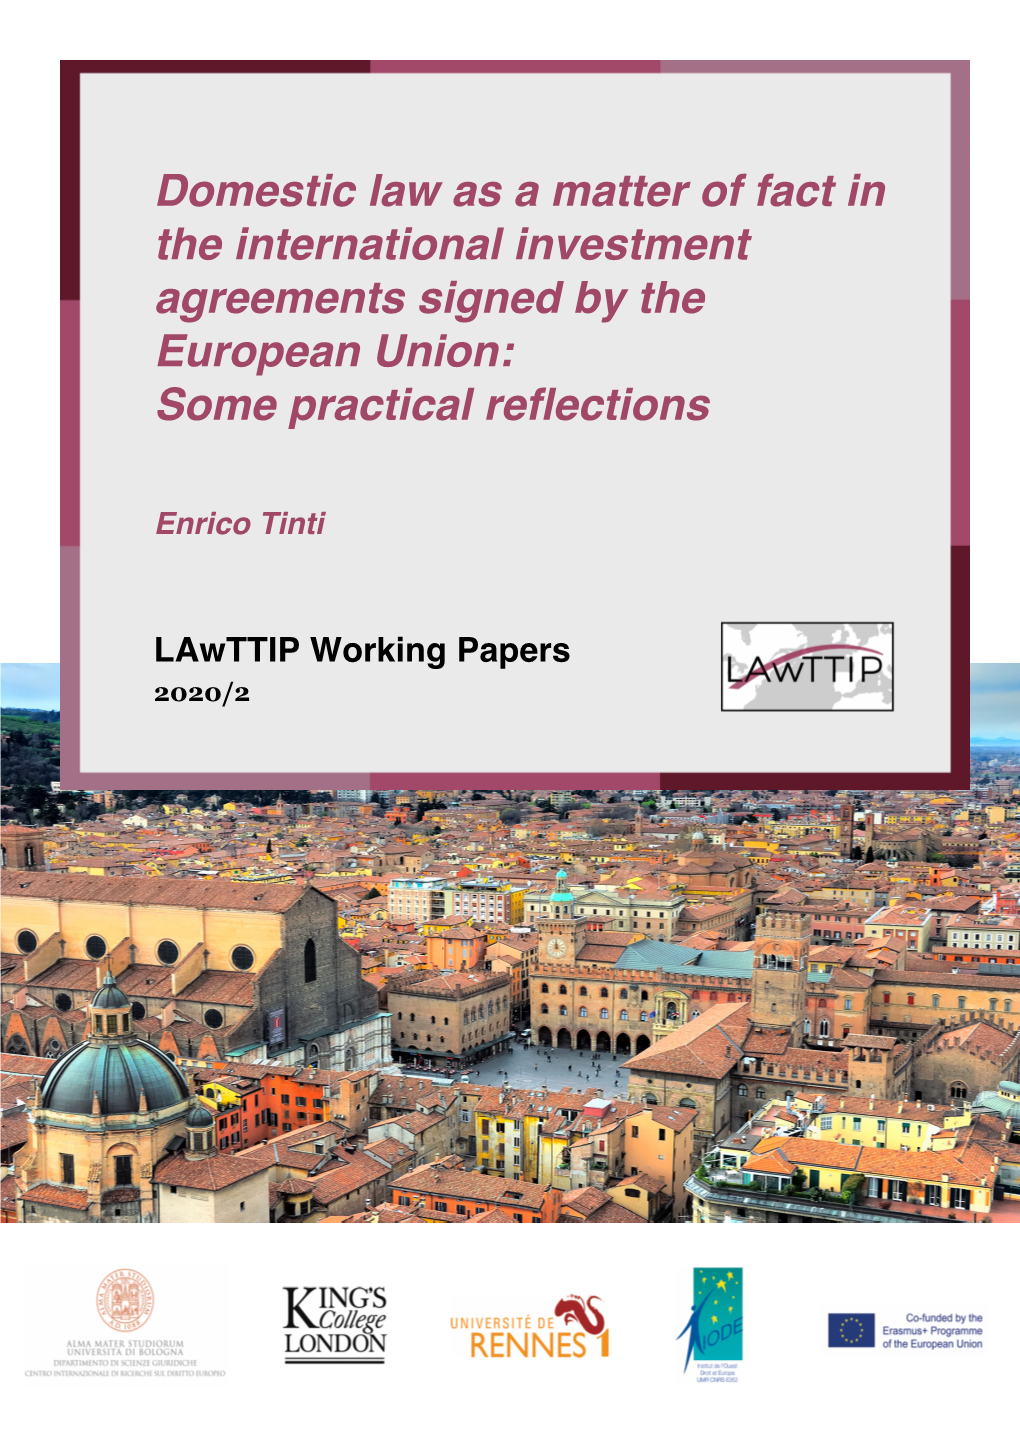 Domestic Law As a Matter of Fact in the International Investment Agreements Signed by the European Union: Some Practical Reflections